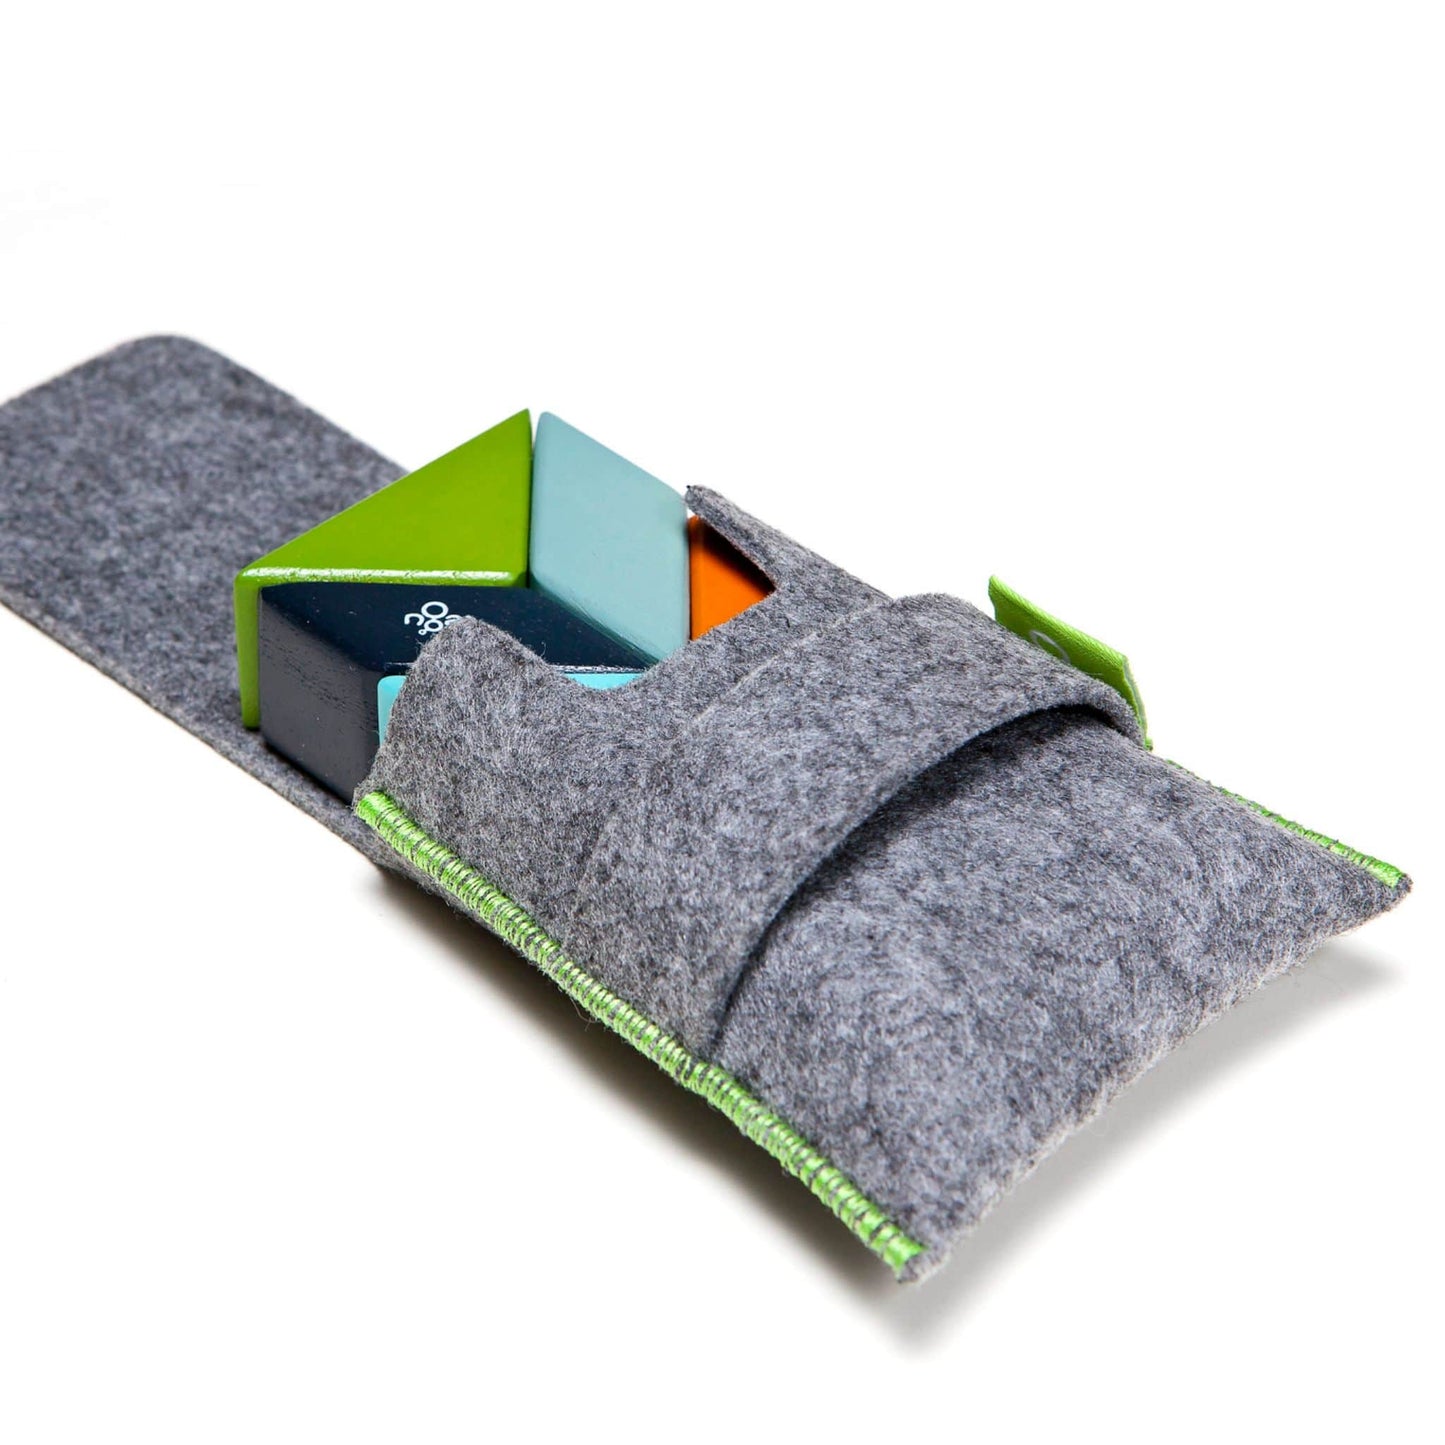 Magnetic Wooden Prism Pocket Pouch in felt pouch